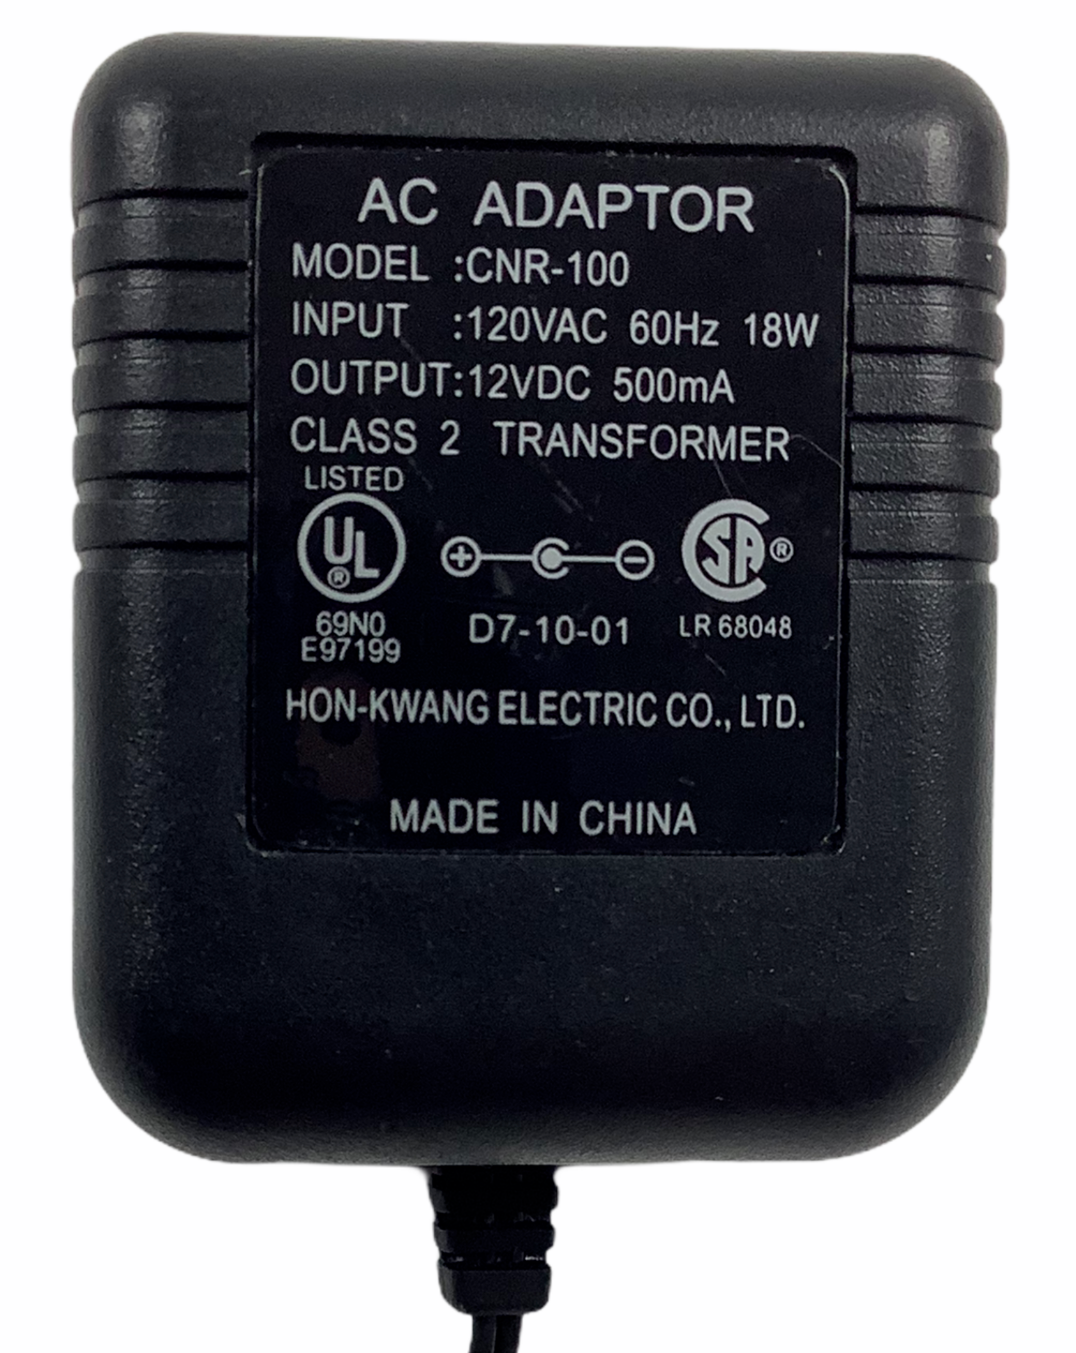 AC Adapter Hon-Kwang Electric Co - Model CNR-100 - 120 VAC, 12VDC, 500mA Type: AC/DC Adapter Output Voltage: 12 V MPN: